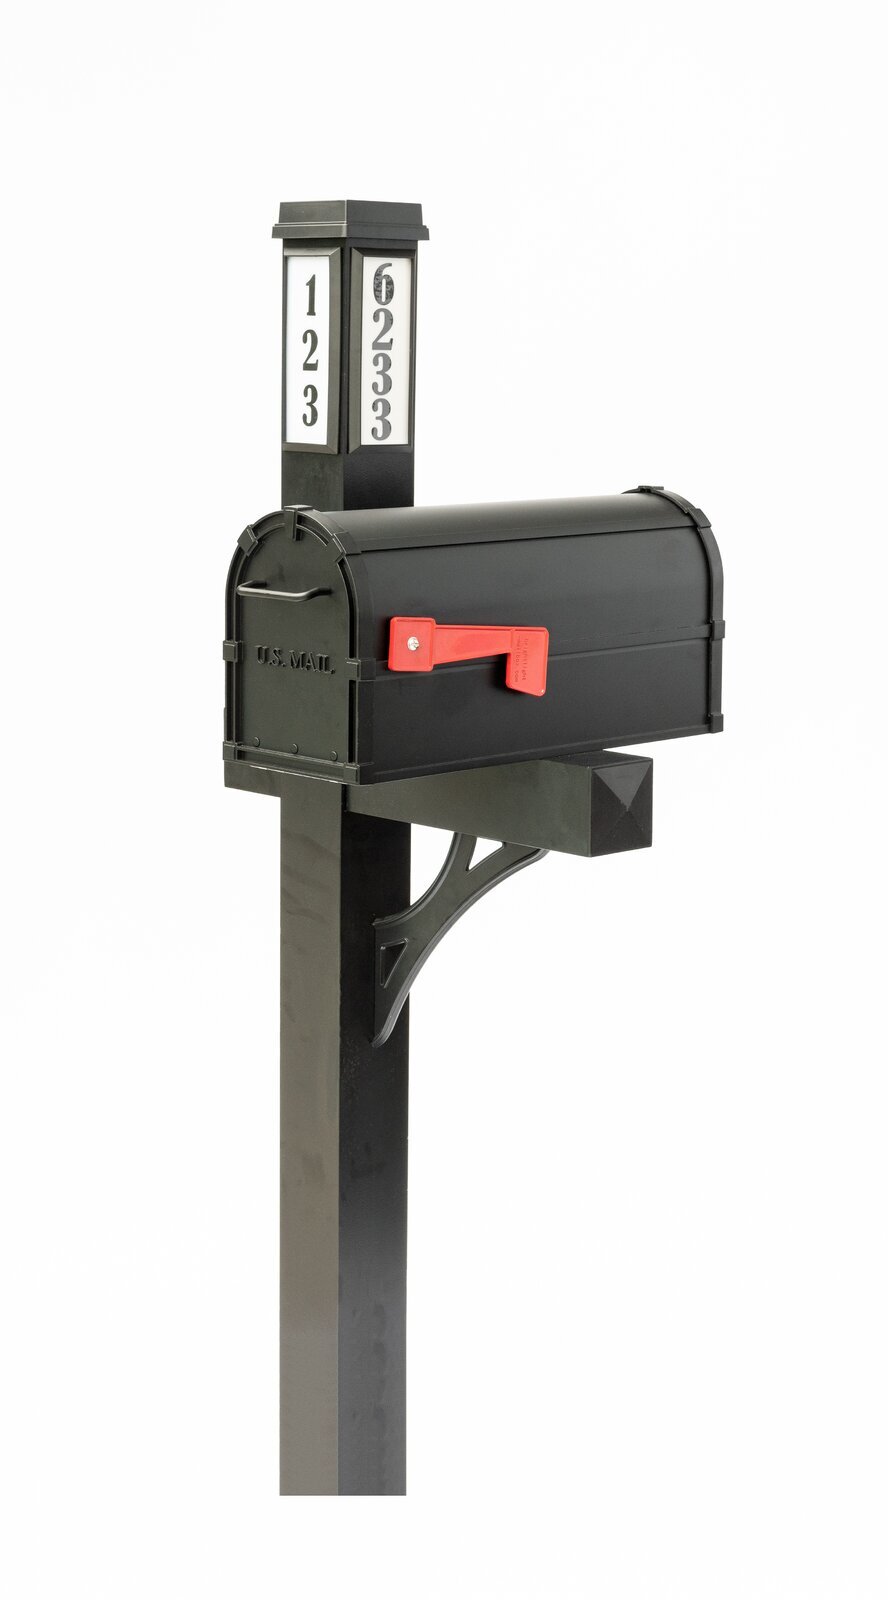 Solar Illuminated Mailbox with Post Included